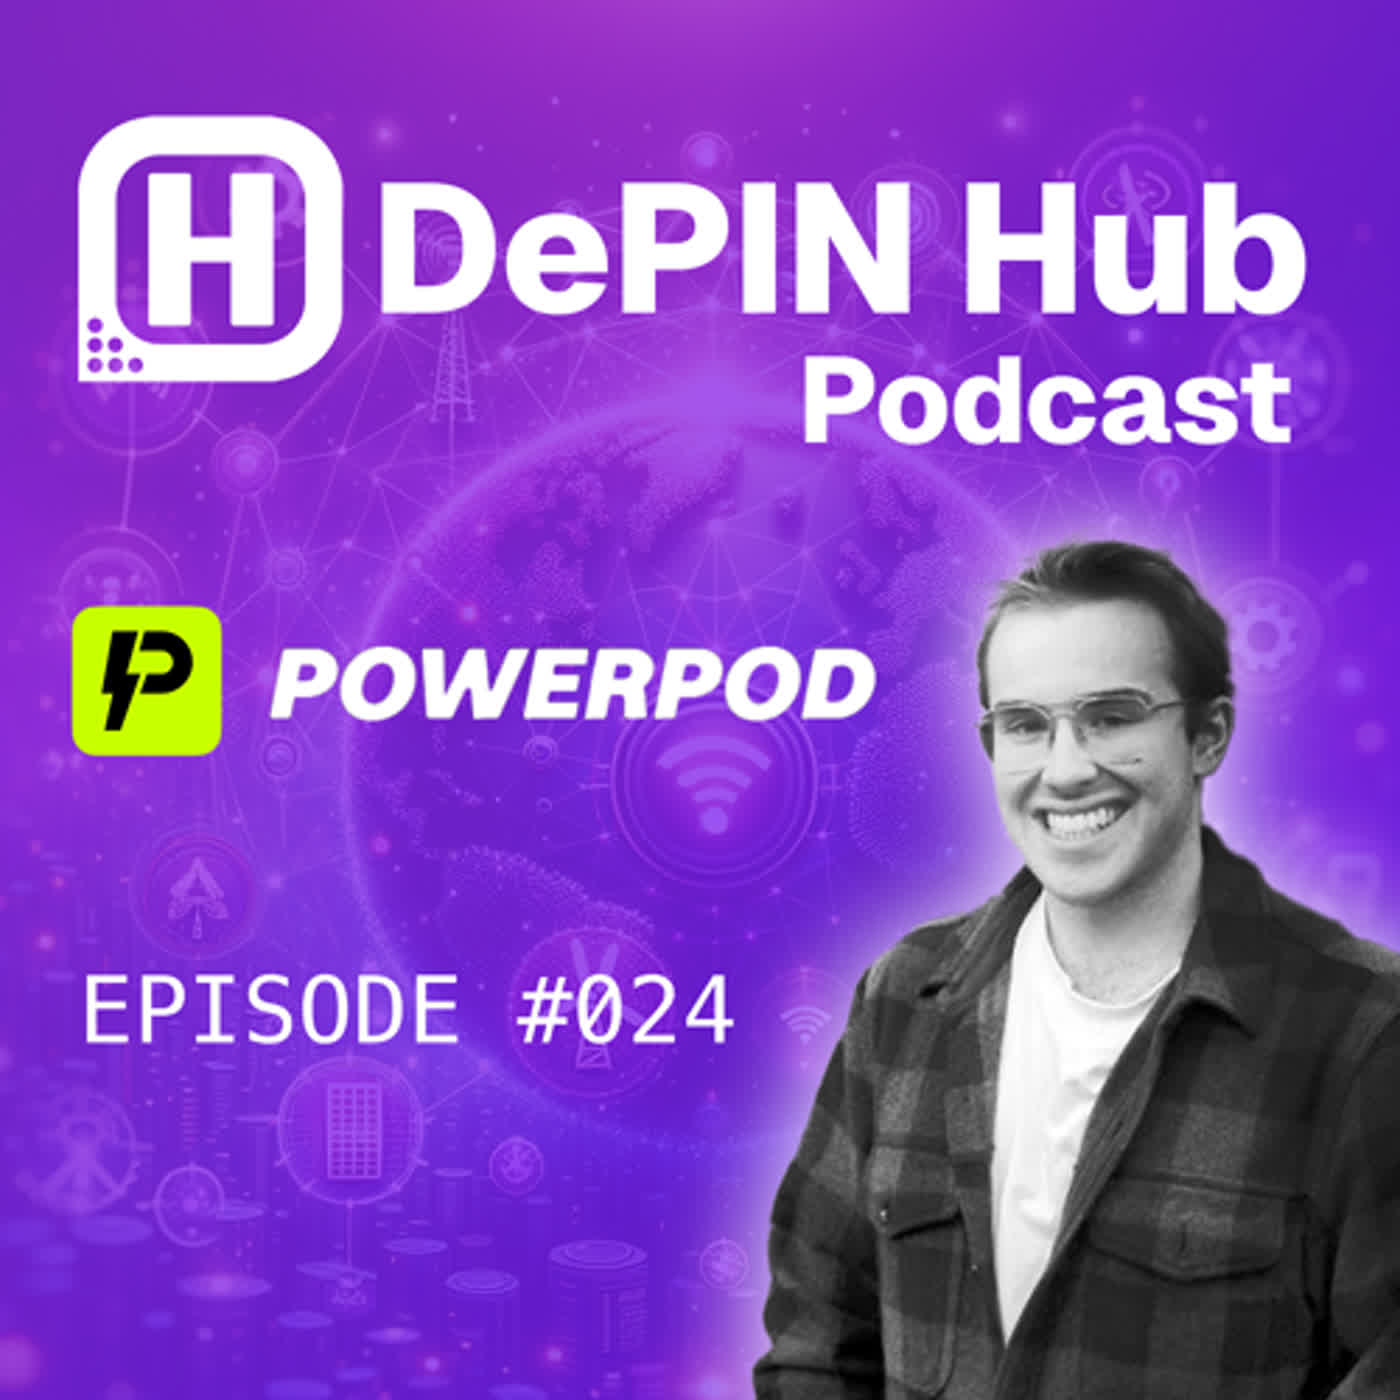 #024 - Powerpod - Building the Airbnb of charging stations for EV vehicles